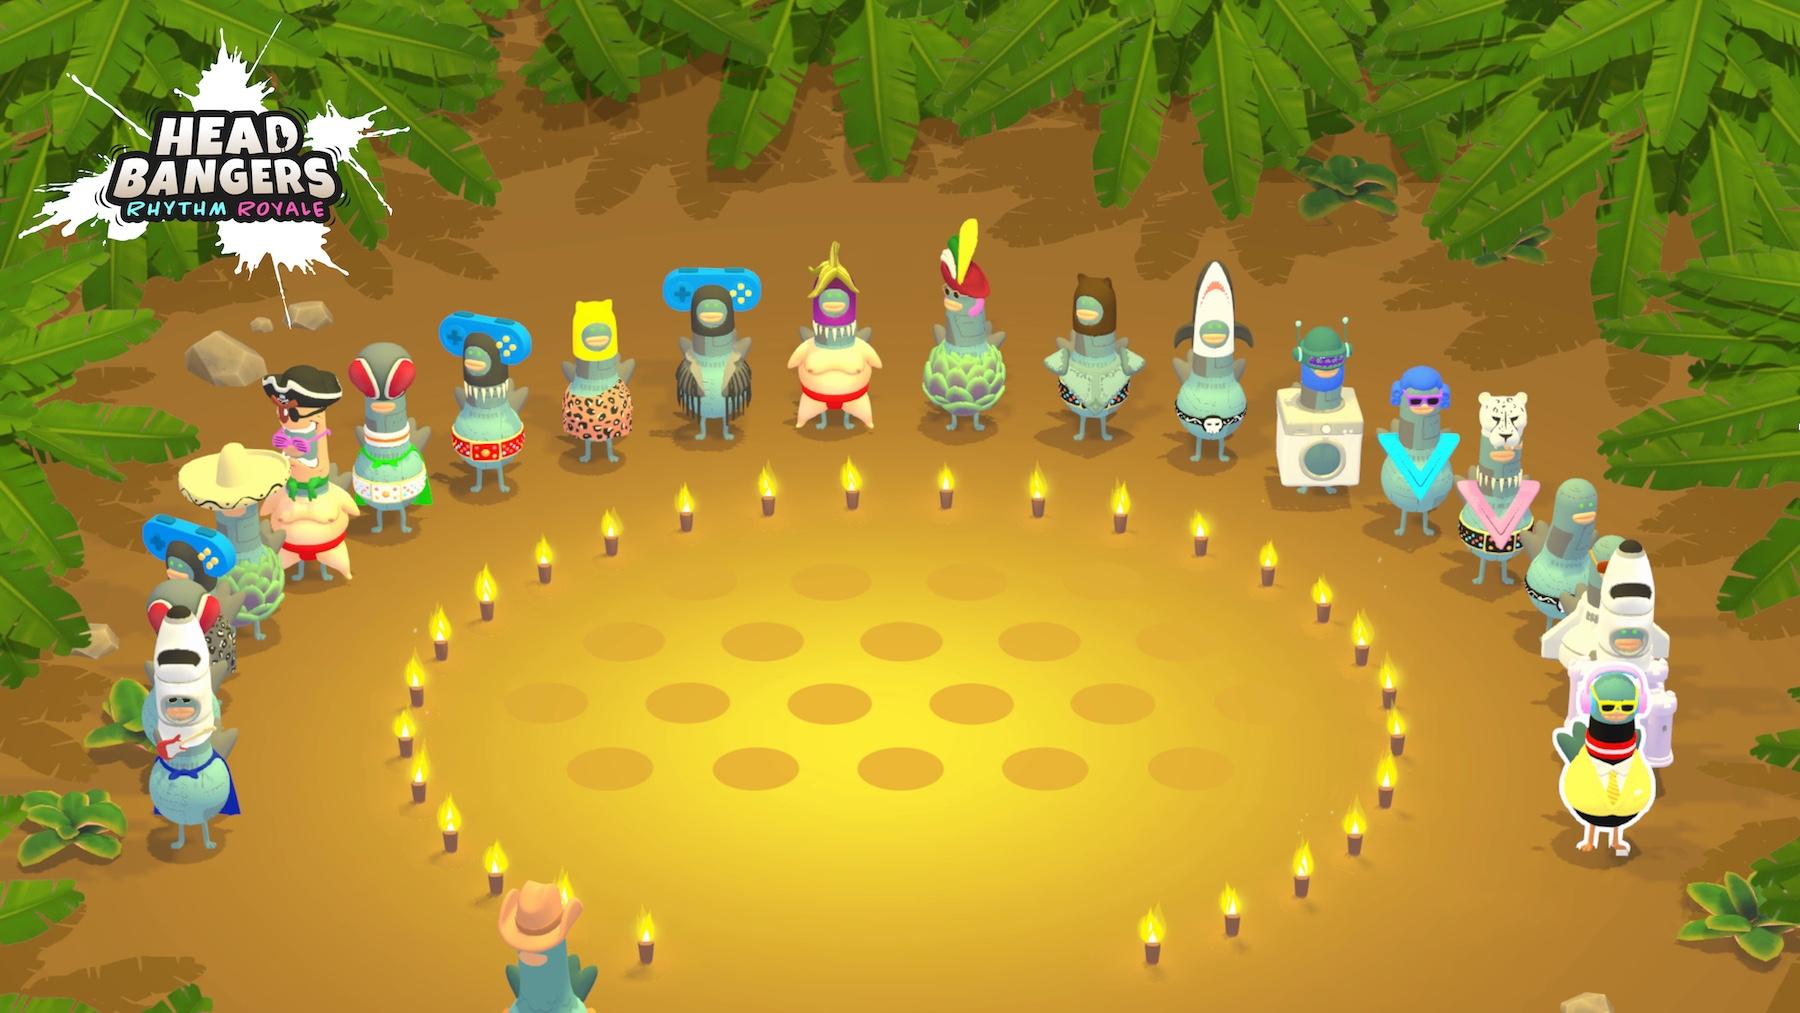 A bunch of pigeons around a circle made of candles in 'Headbangers'